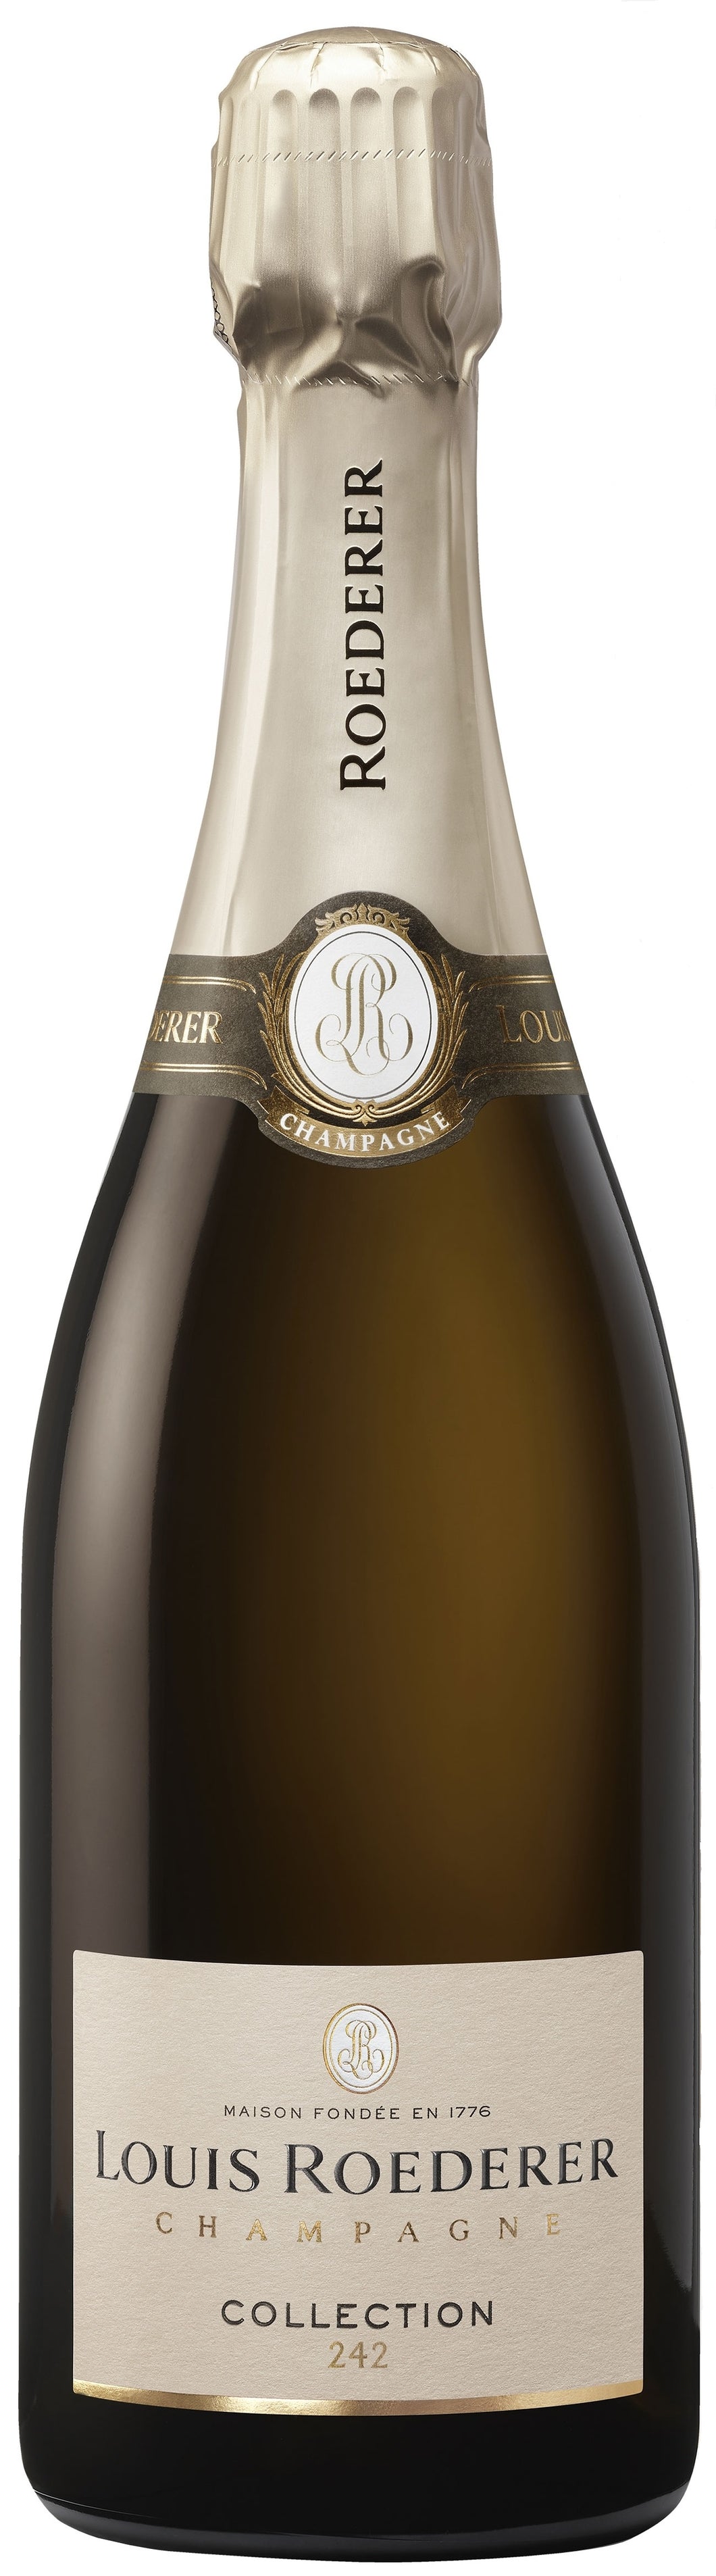 LOUIS ROEDERER COLLECTION 242 BRUT 75 cL